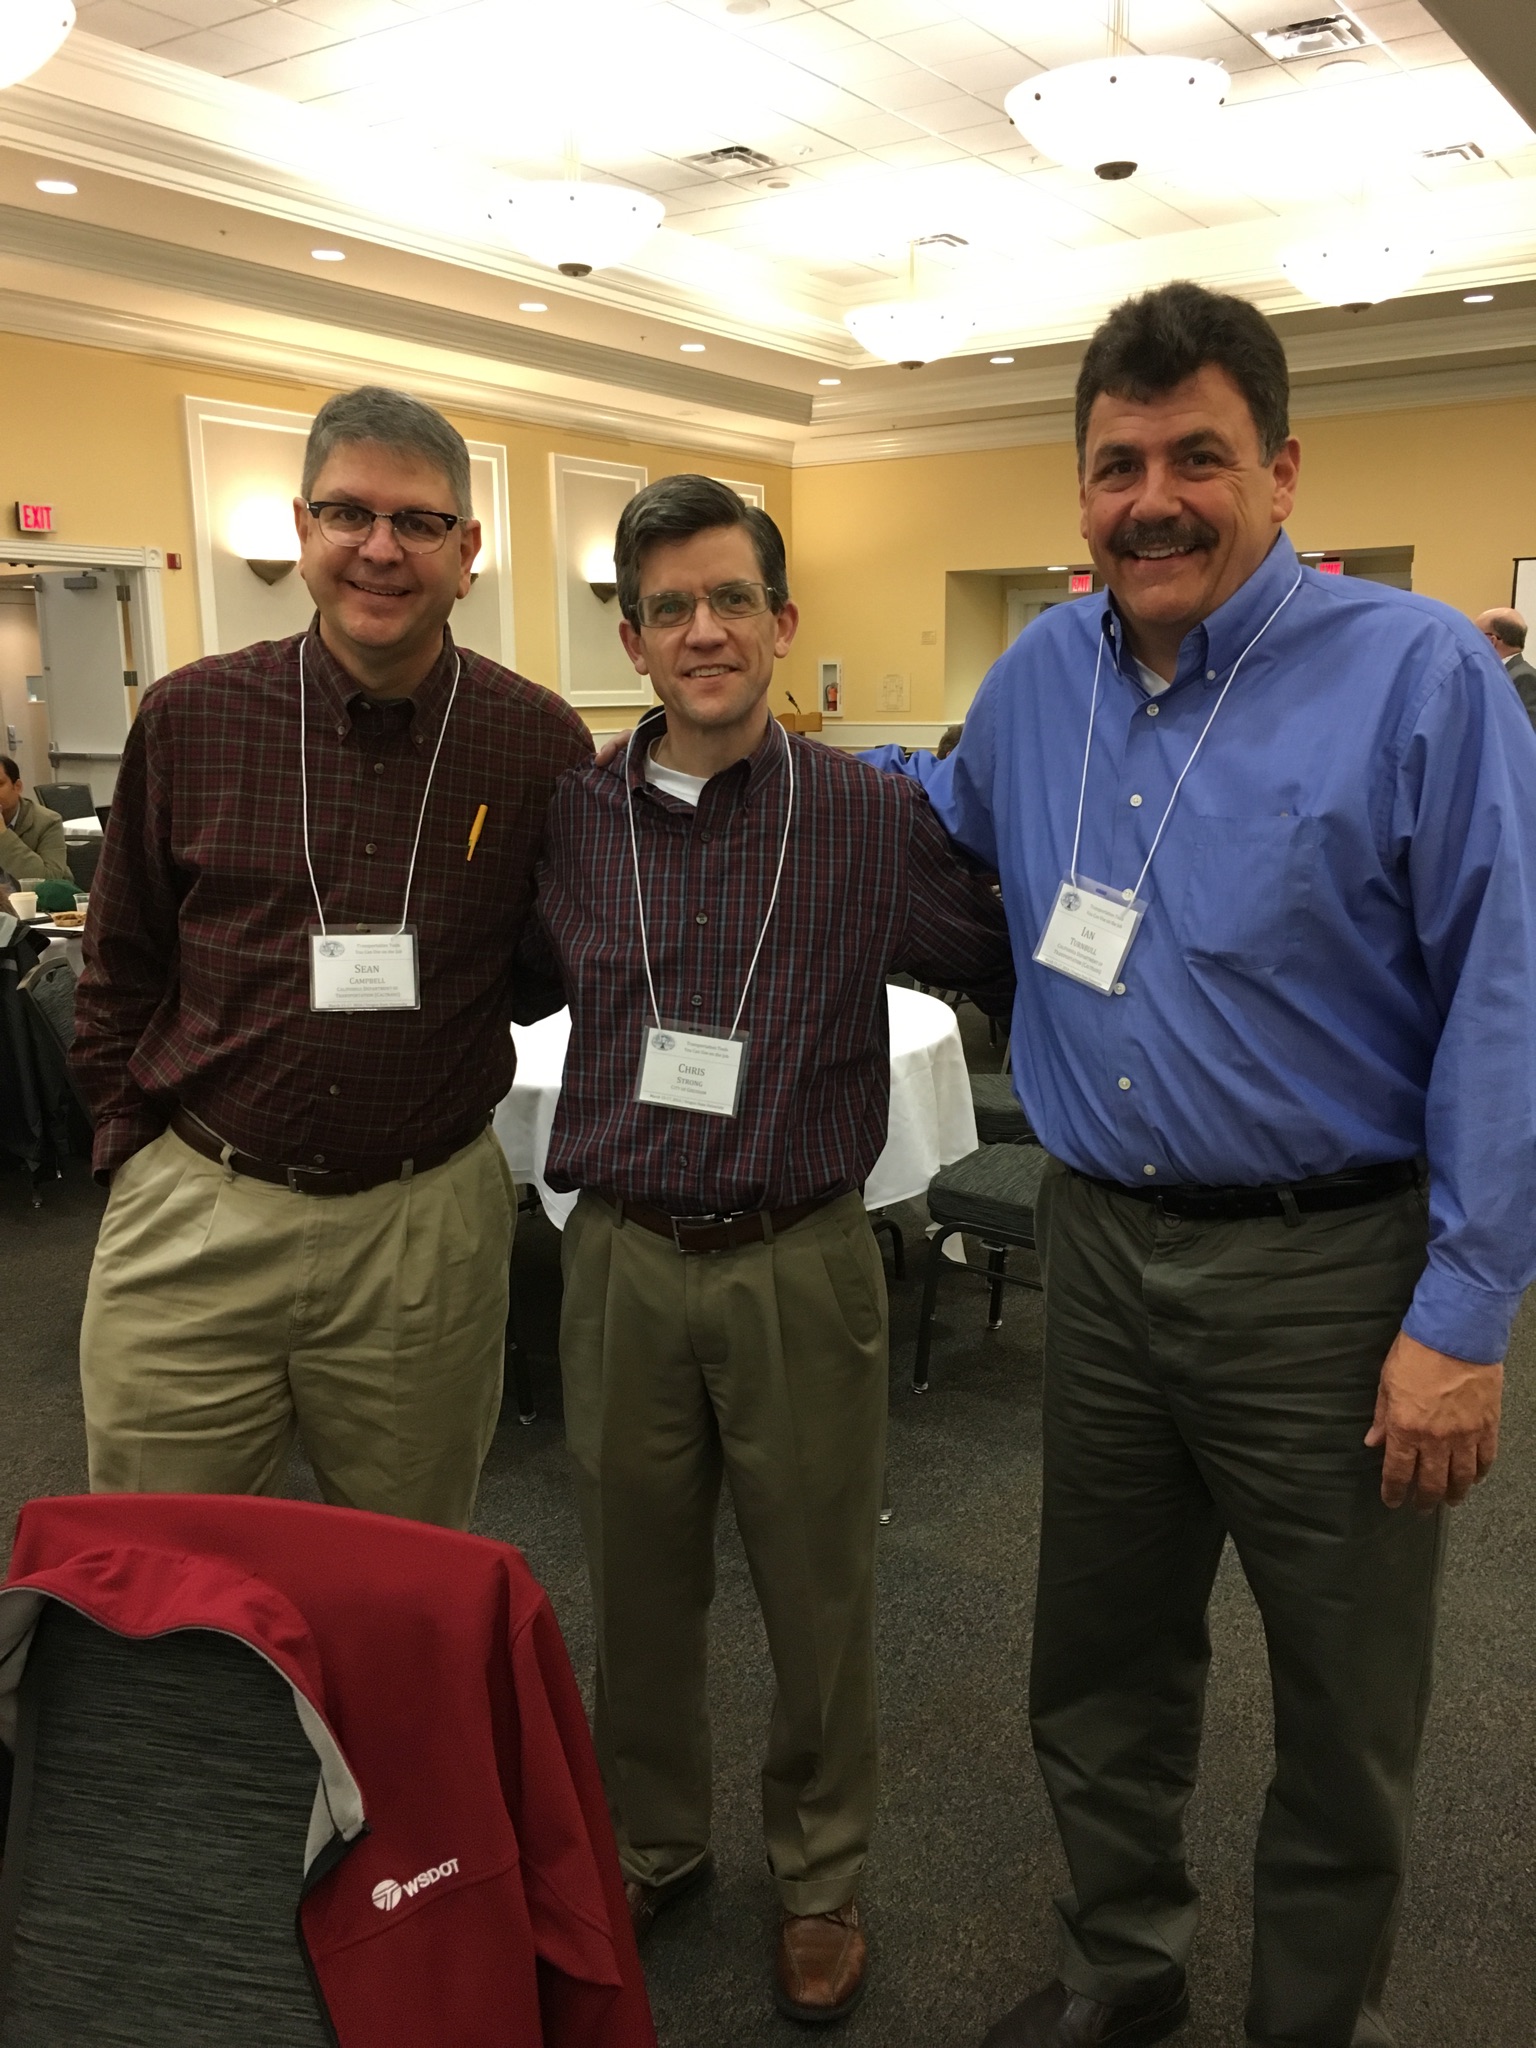 Sean Campbell, Chris Strong and Ian Turnbull at the Northwest Transportation Conference in Corvallis, Oregon, March 2016.